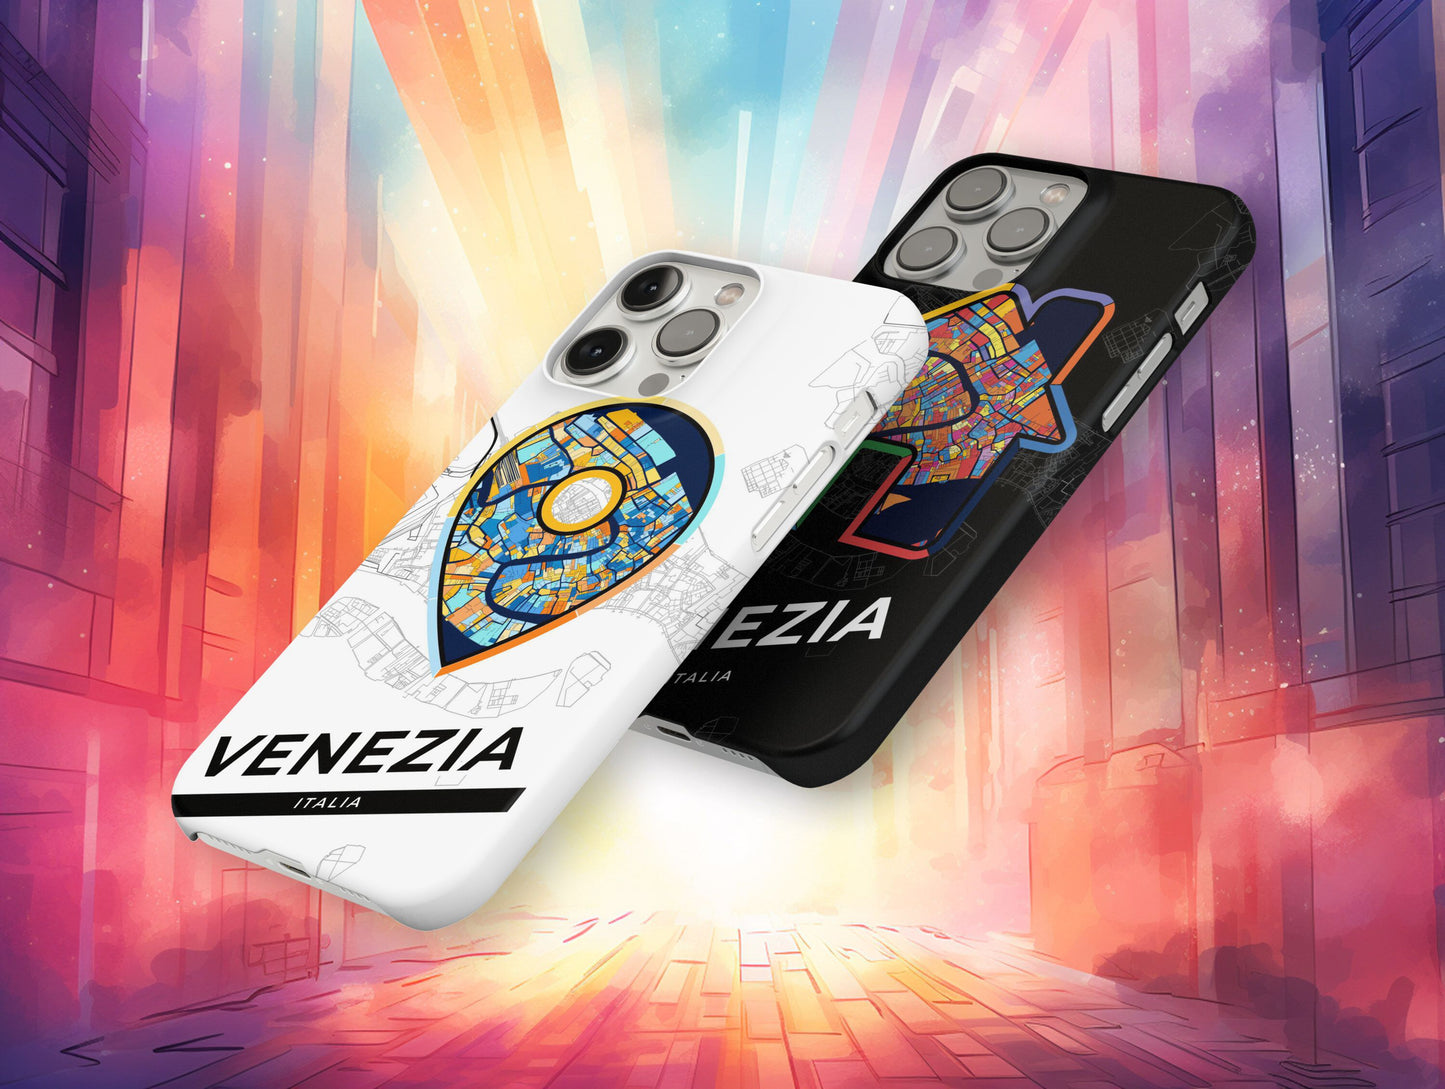 Venice Italy slim phone case with colorful icon